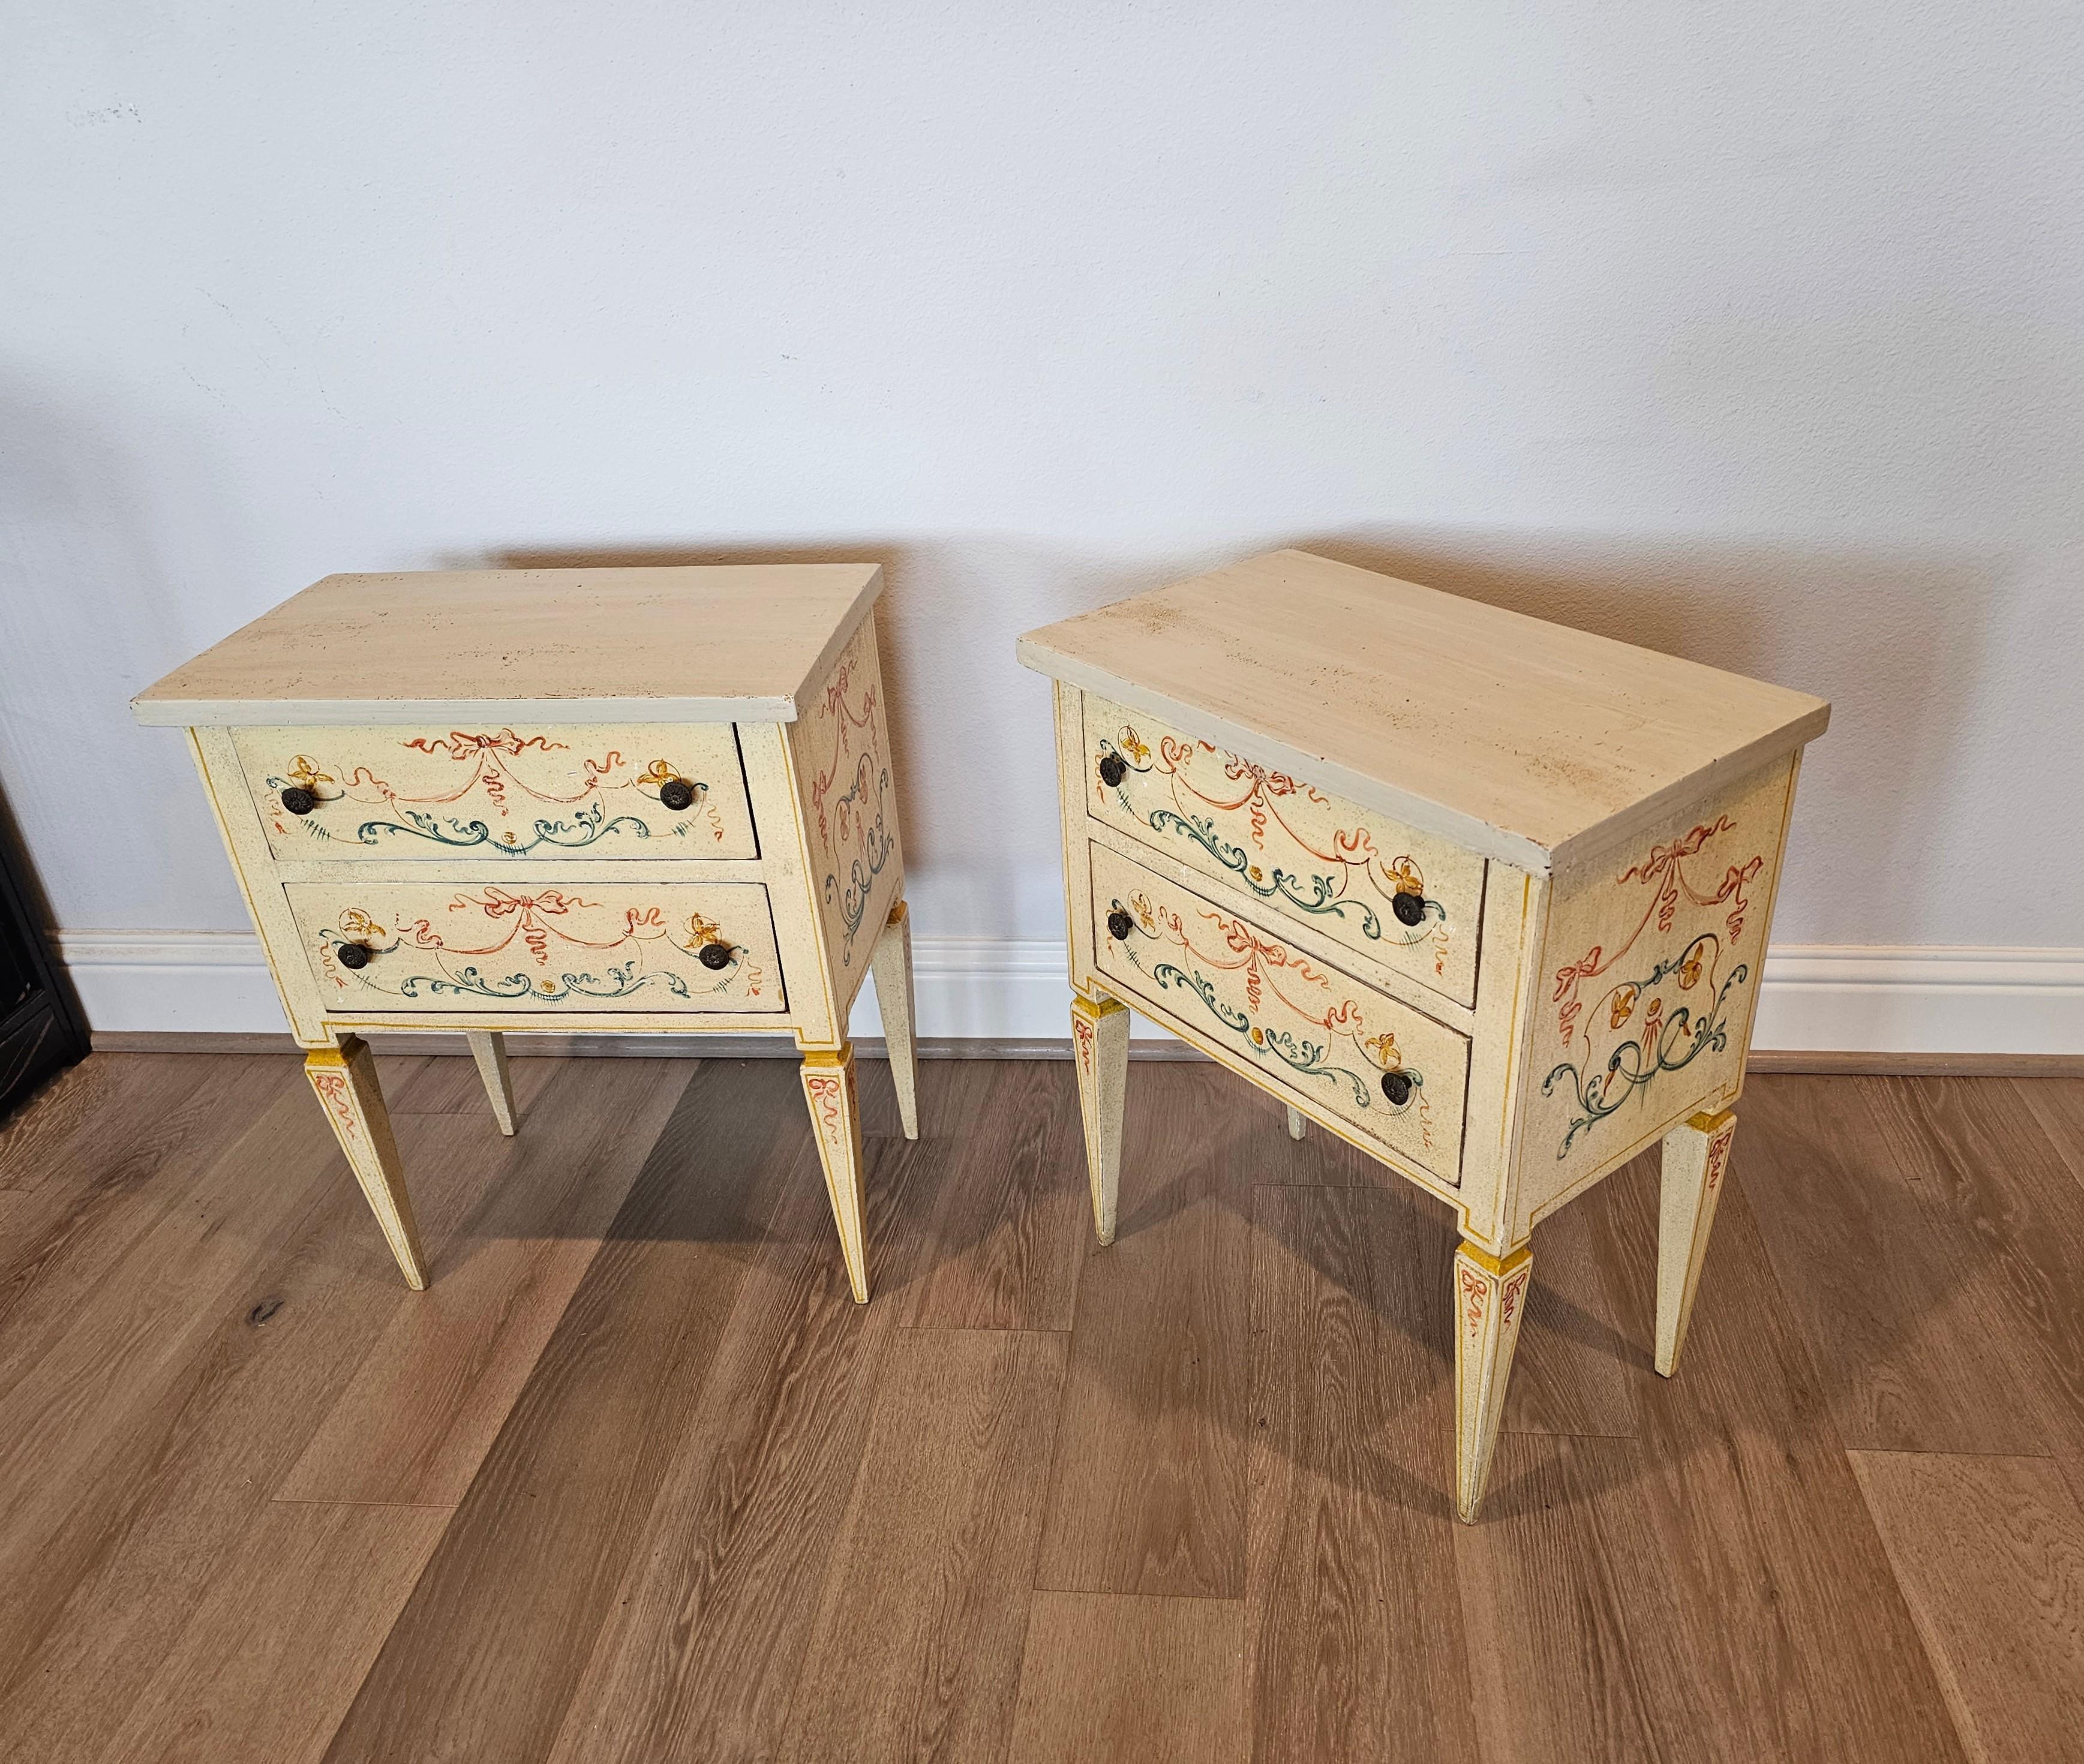 A fabulous pair of vintage Italian Neo-classical original hand-painted nightstands.

Born in Italy in the mid-20th century, hand-crafted in timeless 18th century Neoclassical inspired Louis XVI taste, solid wood construction, having a greige